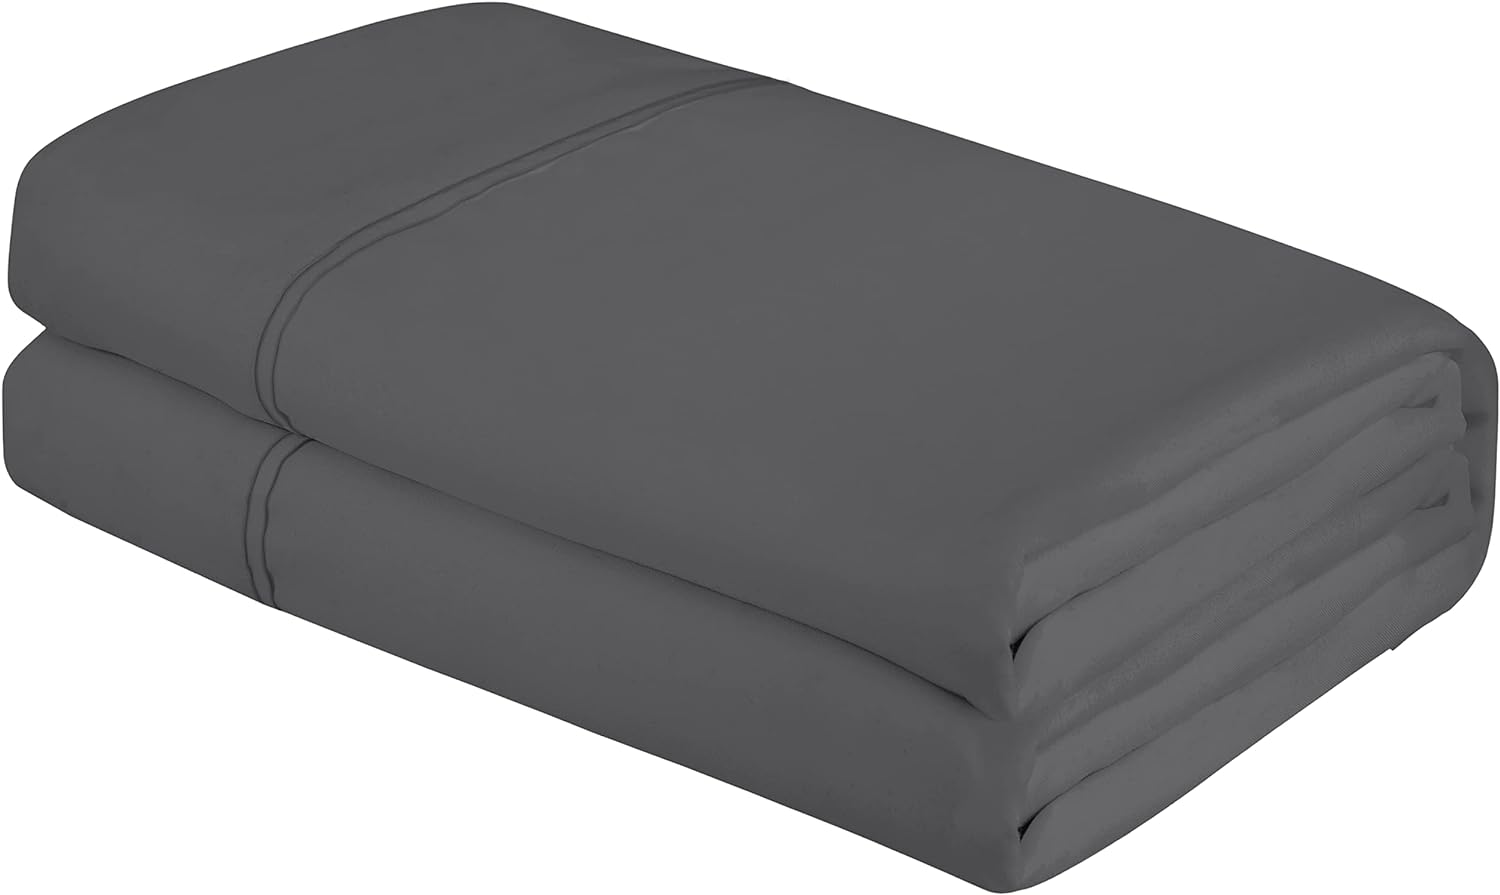 Royale Linens King Size Flat Sheet Only - Brushed 1800 Microfiber - Ultra Soft & Breathable - Wrinkle & Stain Resistant - Hotel Quality Flat Sheet Sold Separately - Top Sheet for Bed - (King, Grey)